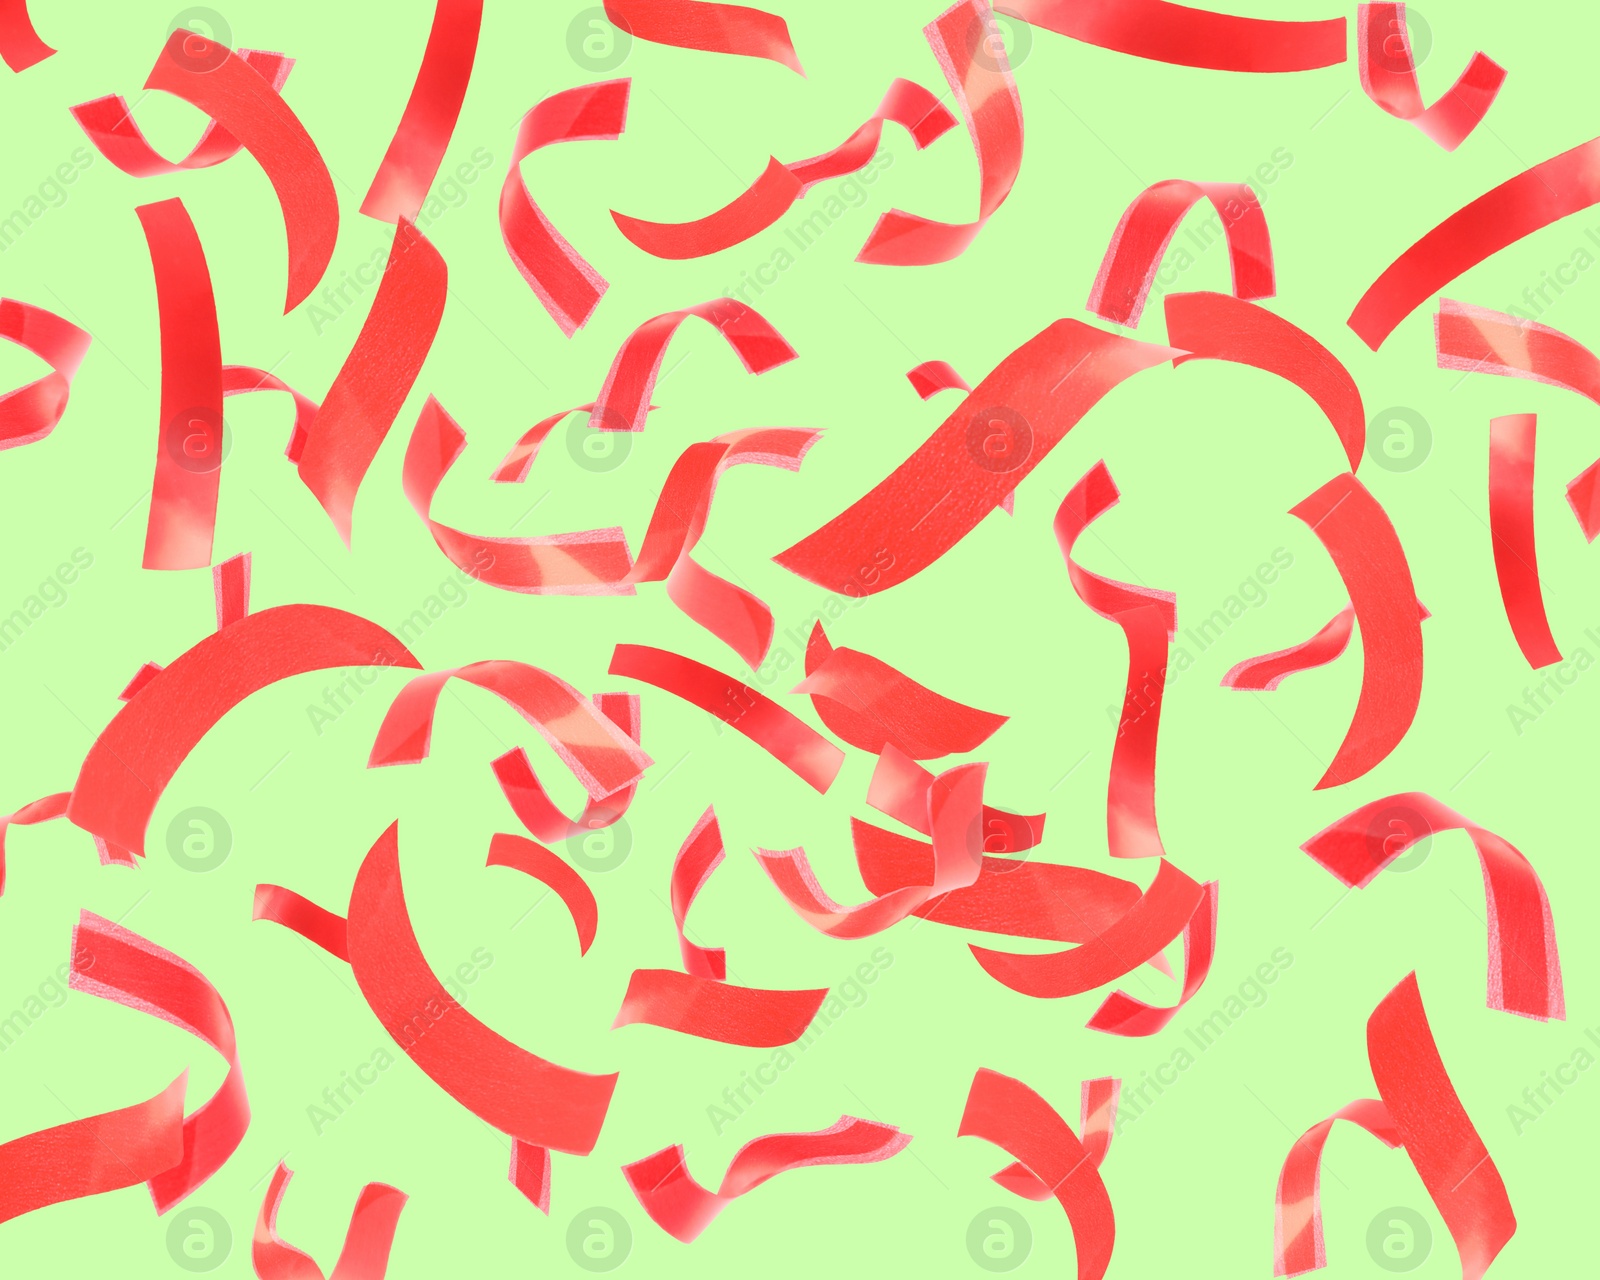 Image of Bright red confetti falling on light green background